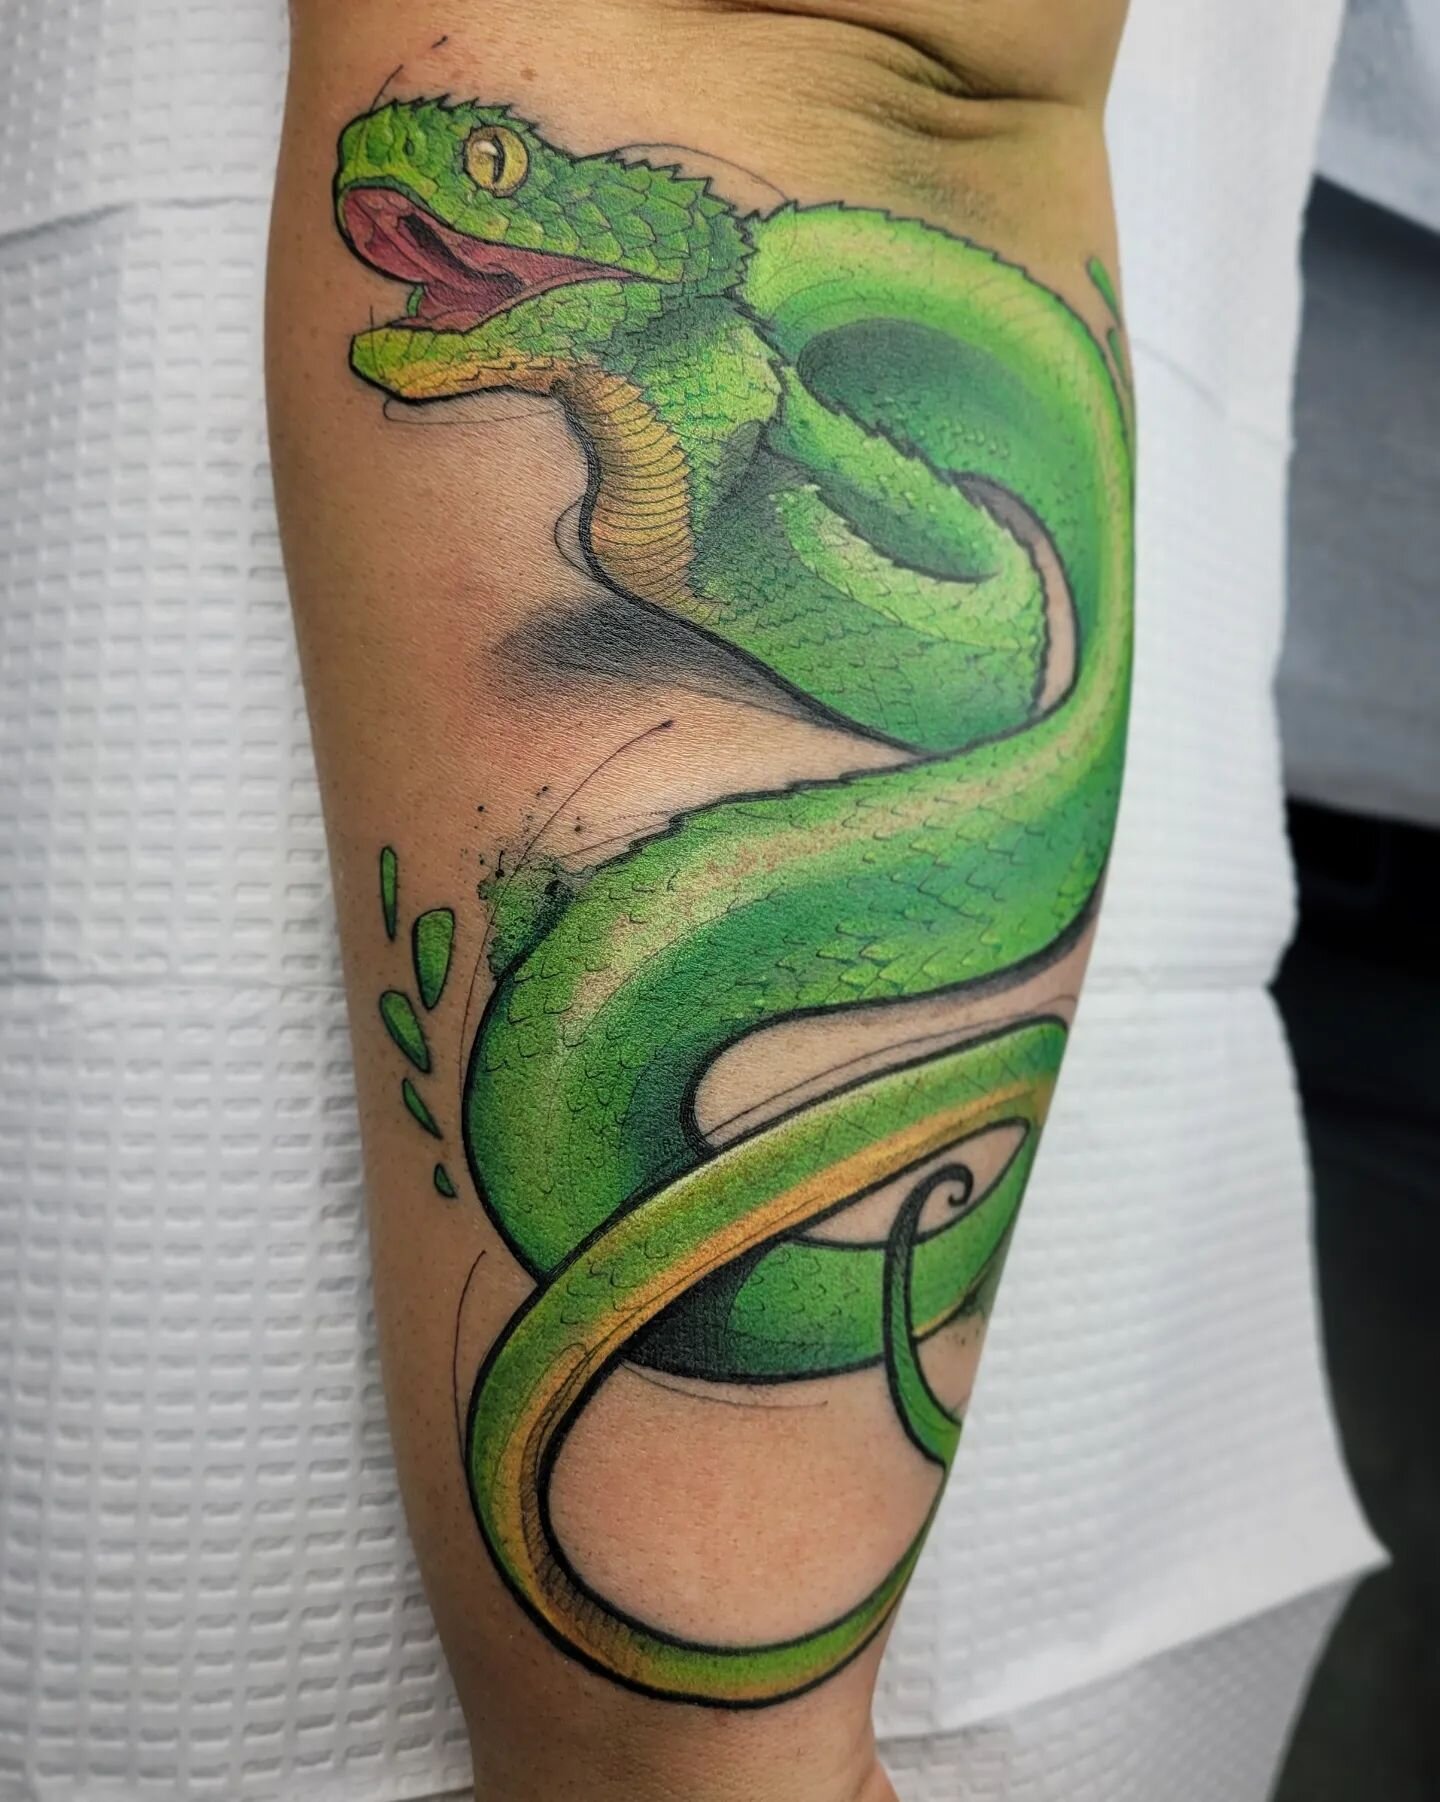 🐍 DANGER NOODLE 🐍
.
Spiny Bush Viper for Riley! One shot! Thanks for looking! 
.
.
.
.
.
.
.
.
.
#tattoos #tattoo #art #spinybushviper #snake #snaketattoo #transformation #love #igtattoo #daily #watercolortattoo